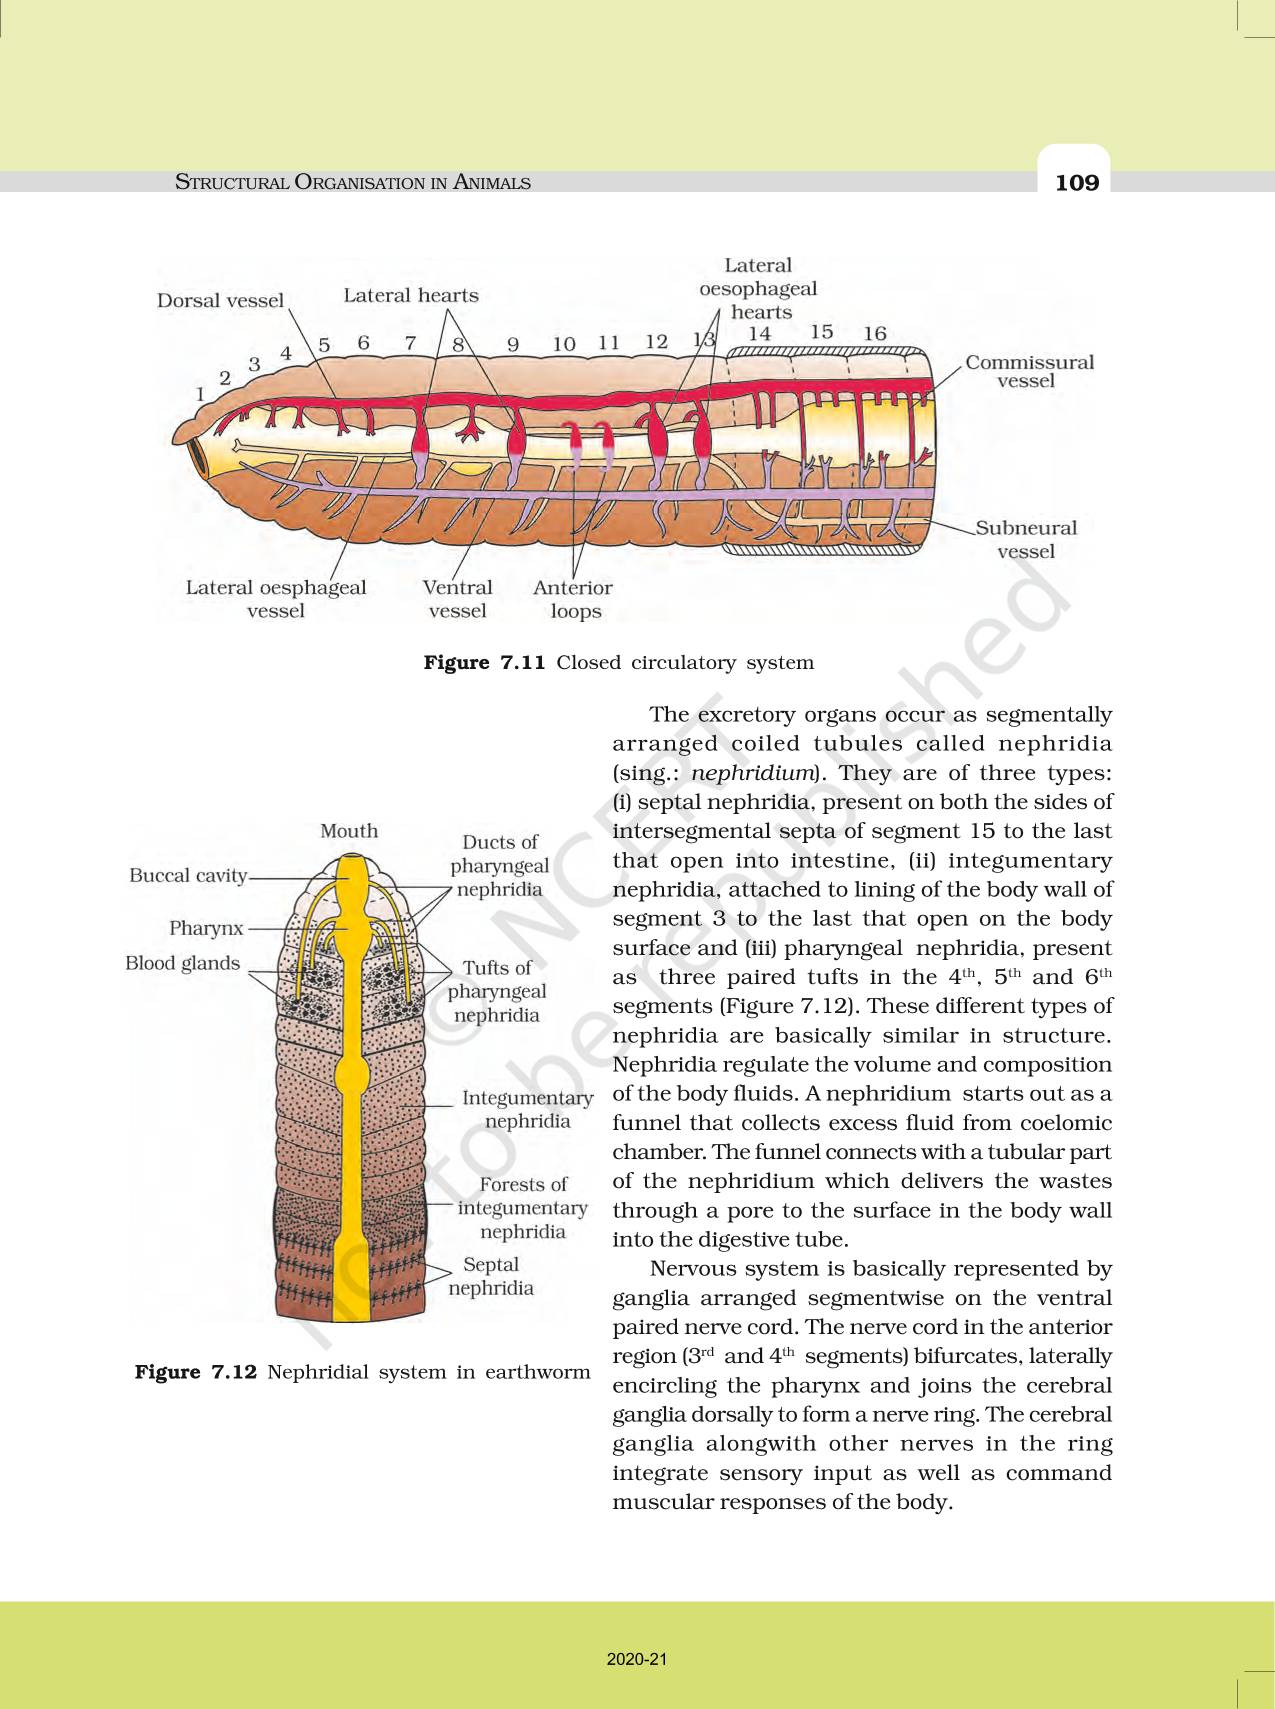 Structural Organisation In Animals - NCERT Book of Class 11 Biology